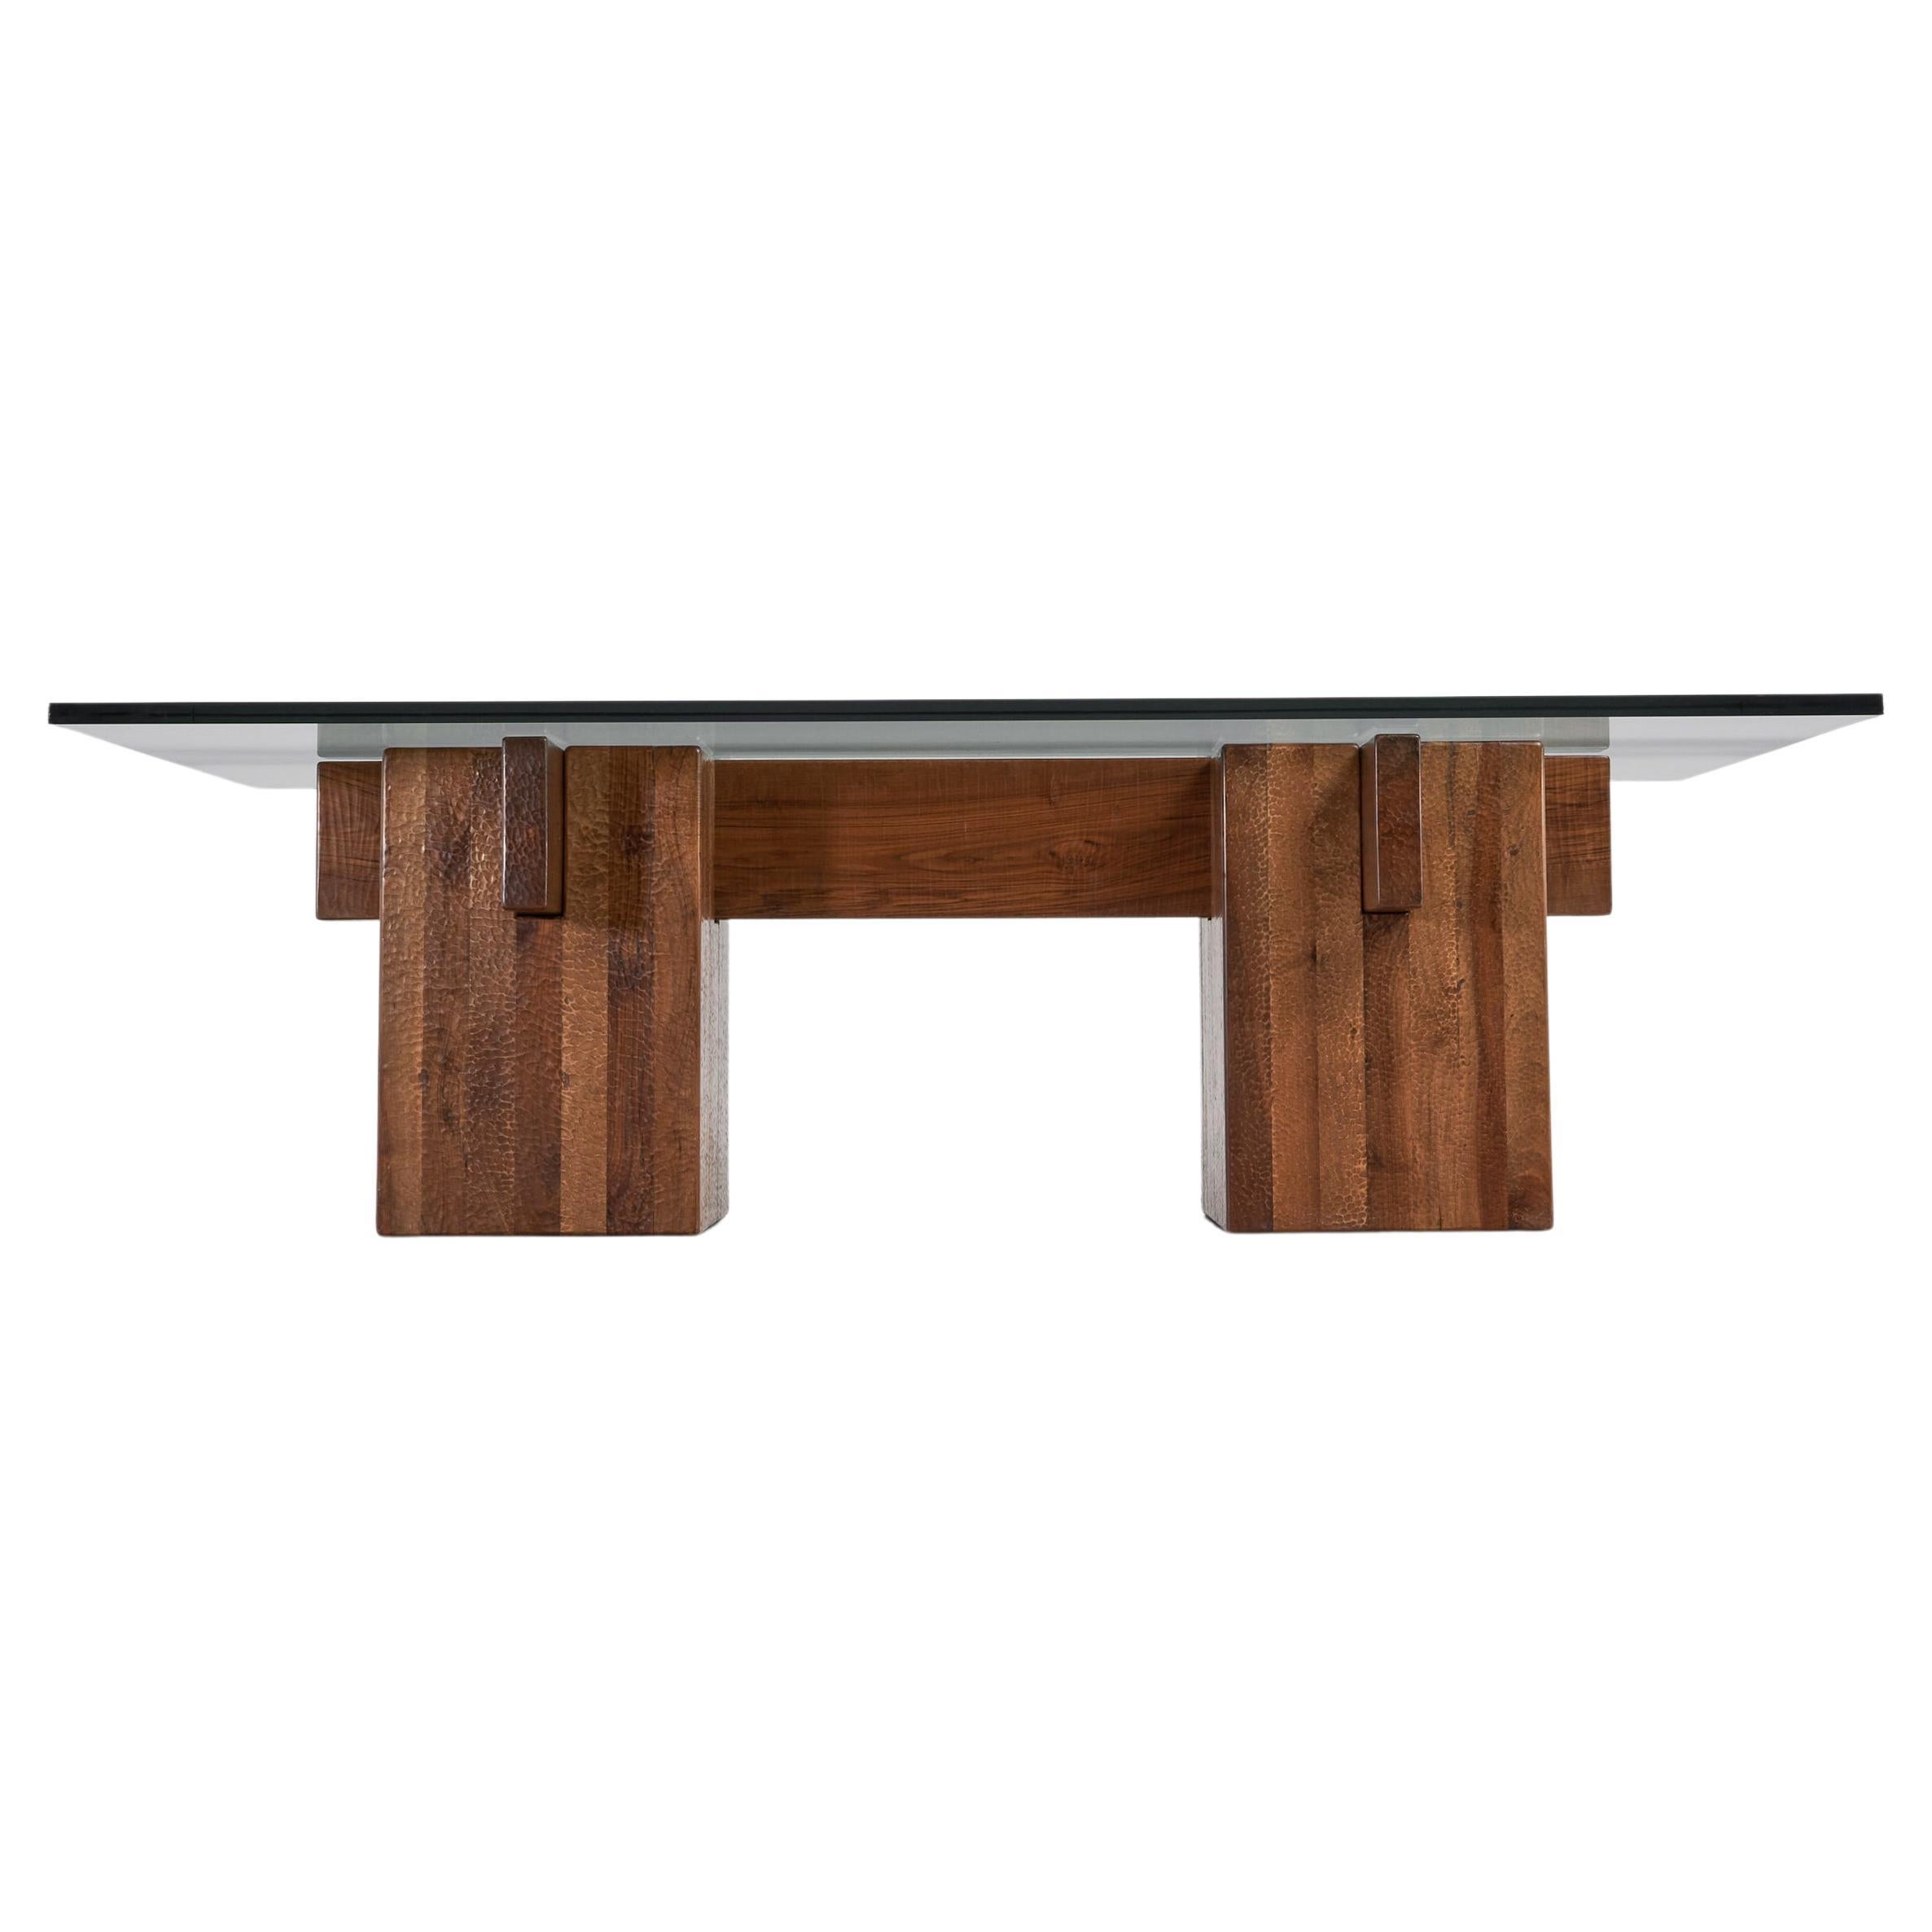 Giuseppe Rivadossi Brutalist Dining Table, Italy, 1979